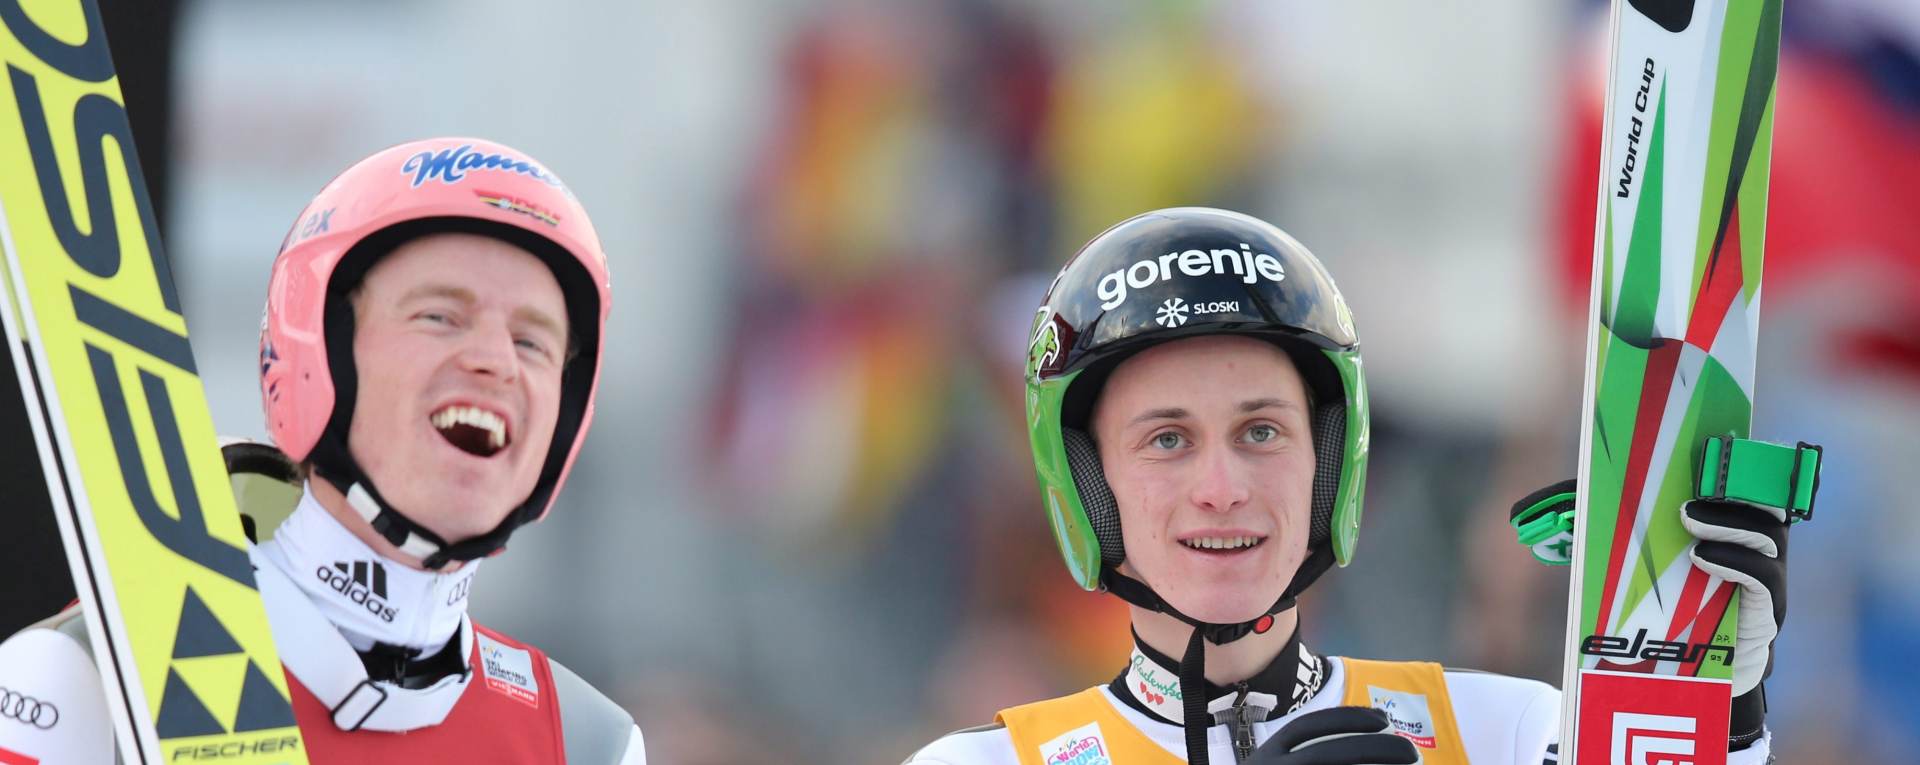 epa05085356 Severin Freund (L) of Germany and Peter Prevc of Slovenia react during the second stage of the Four Hills ski jumping tournament in Garmisch-Partenkirchen, Germany, 01 January 2016.  EPA/DANIEL KARMANN